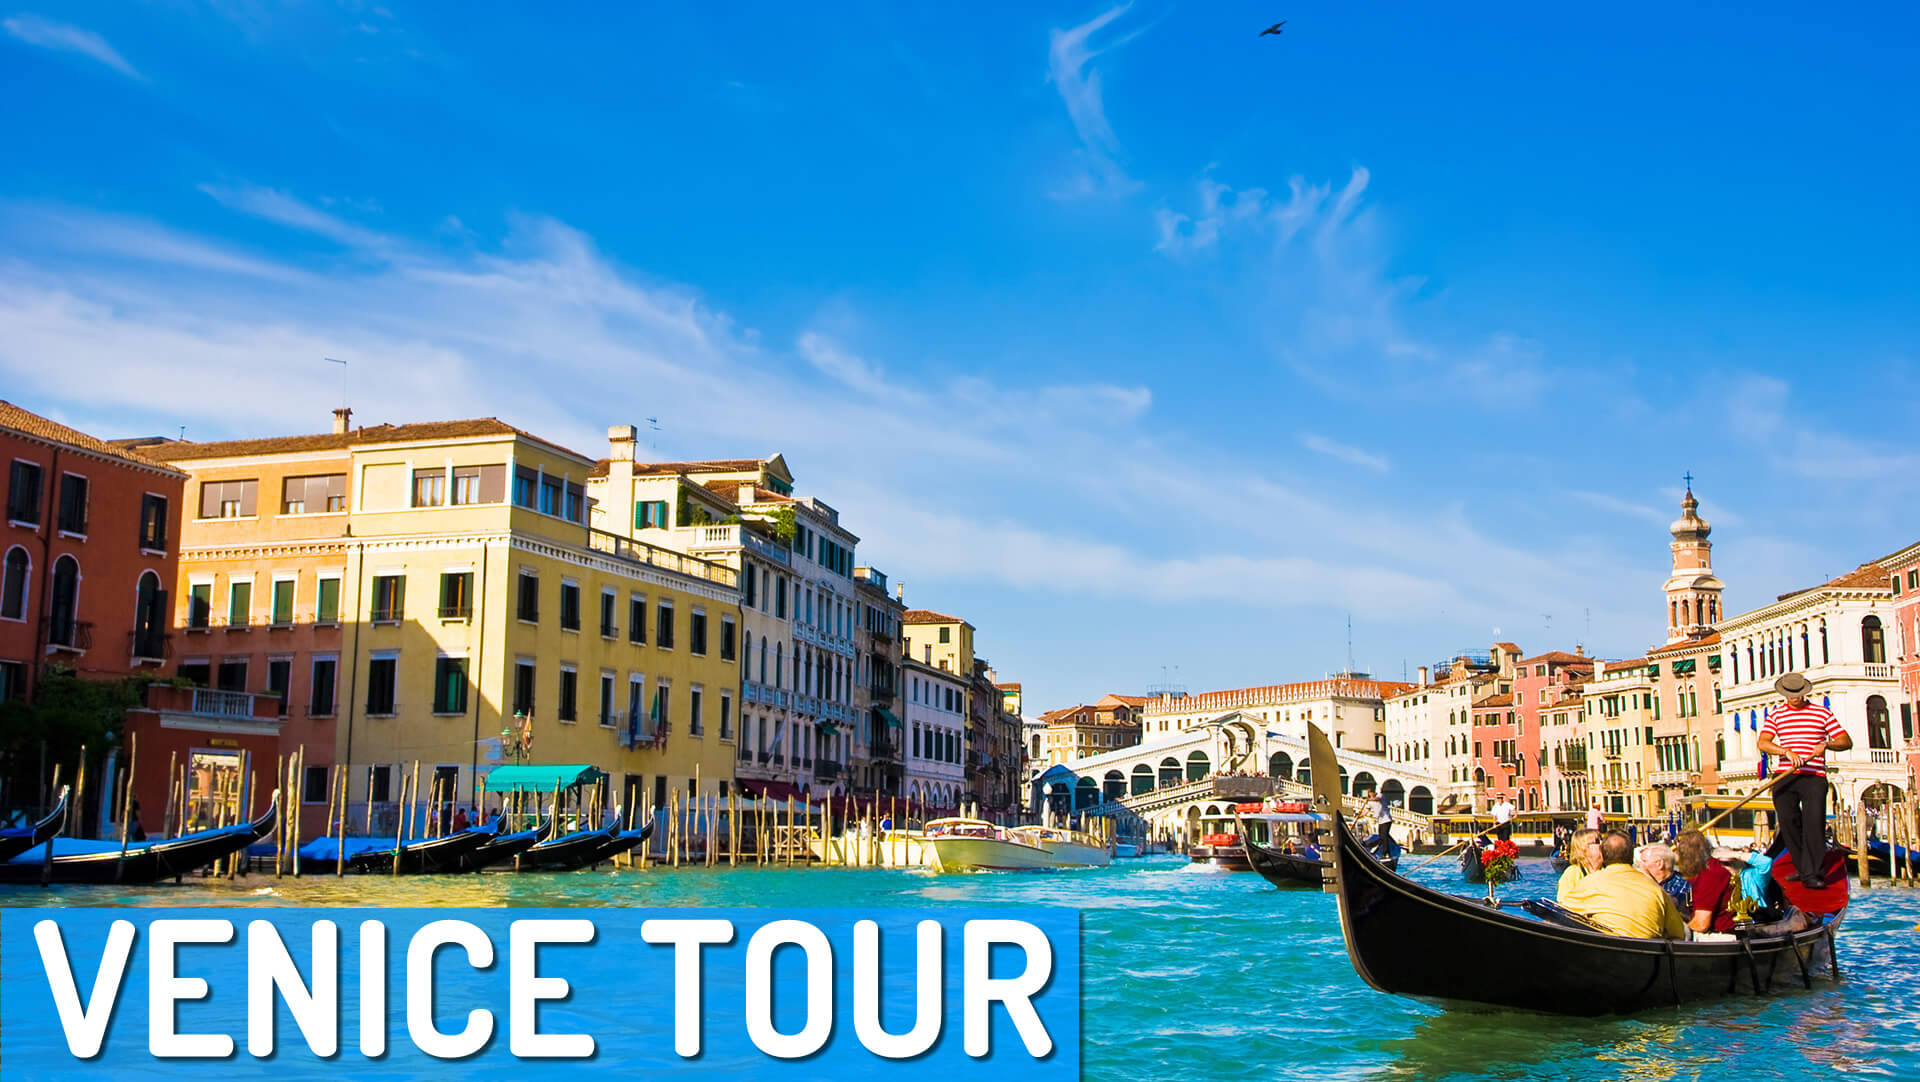 Luxury shops and boutiques with Rialto Bridge